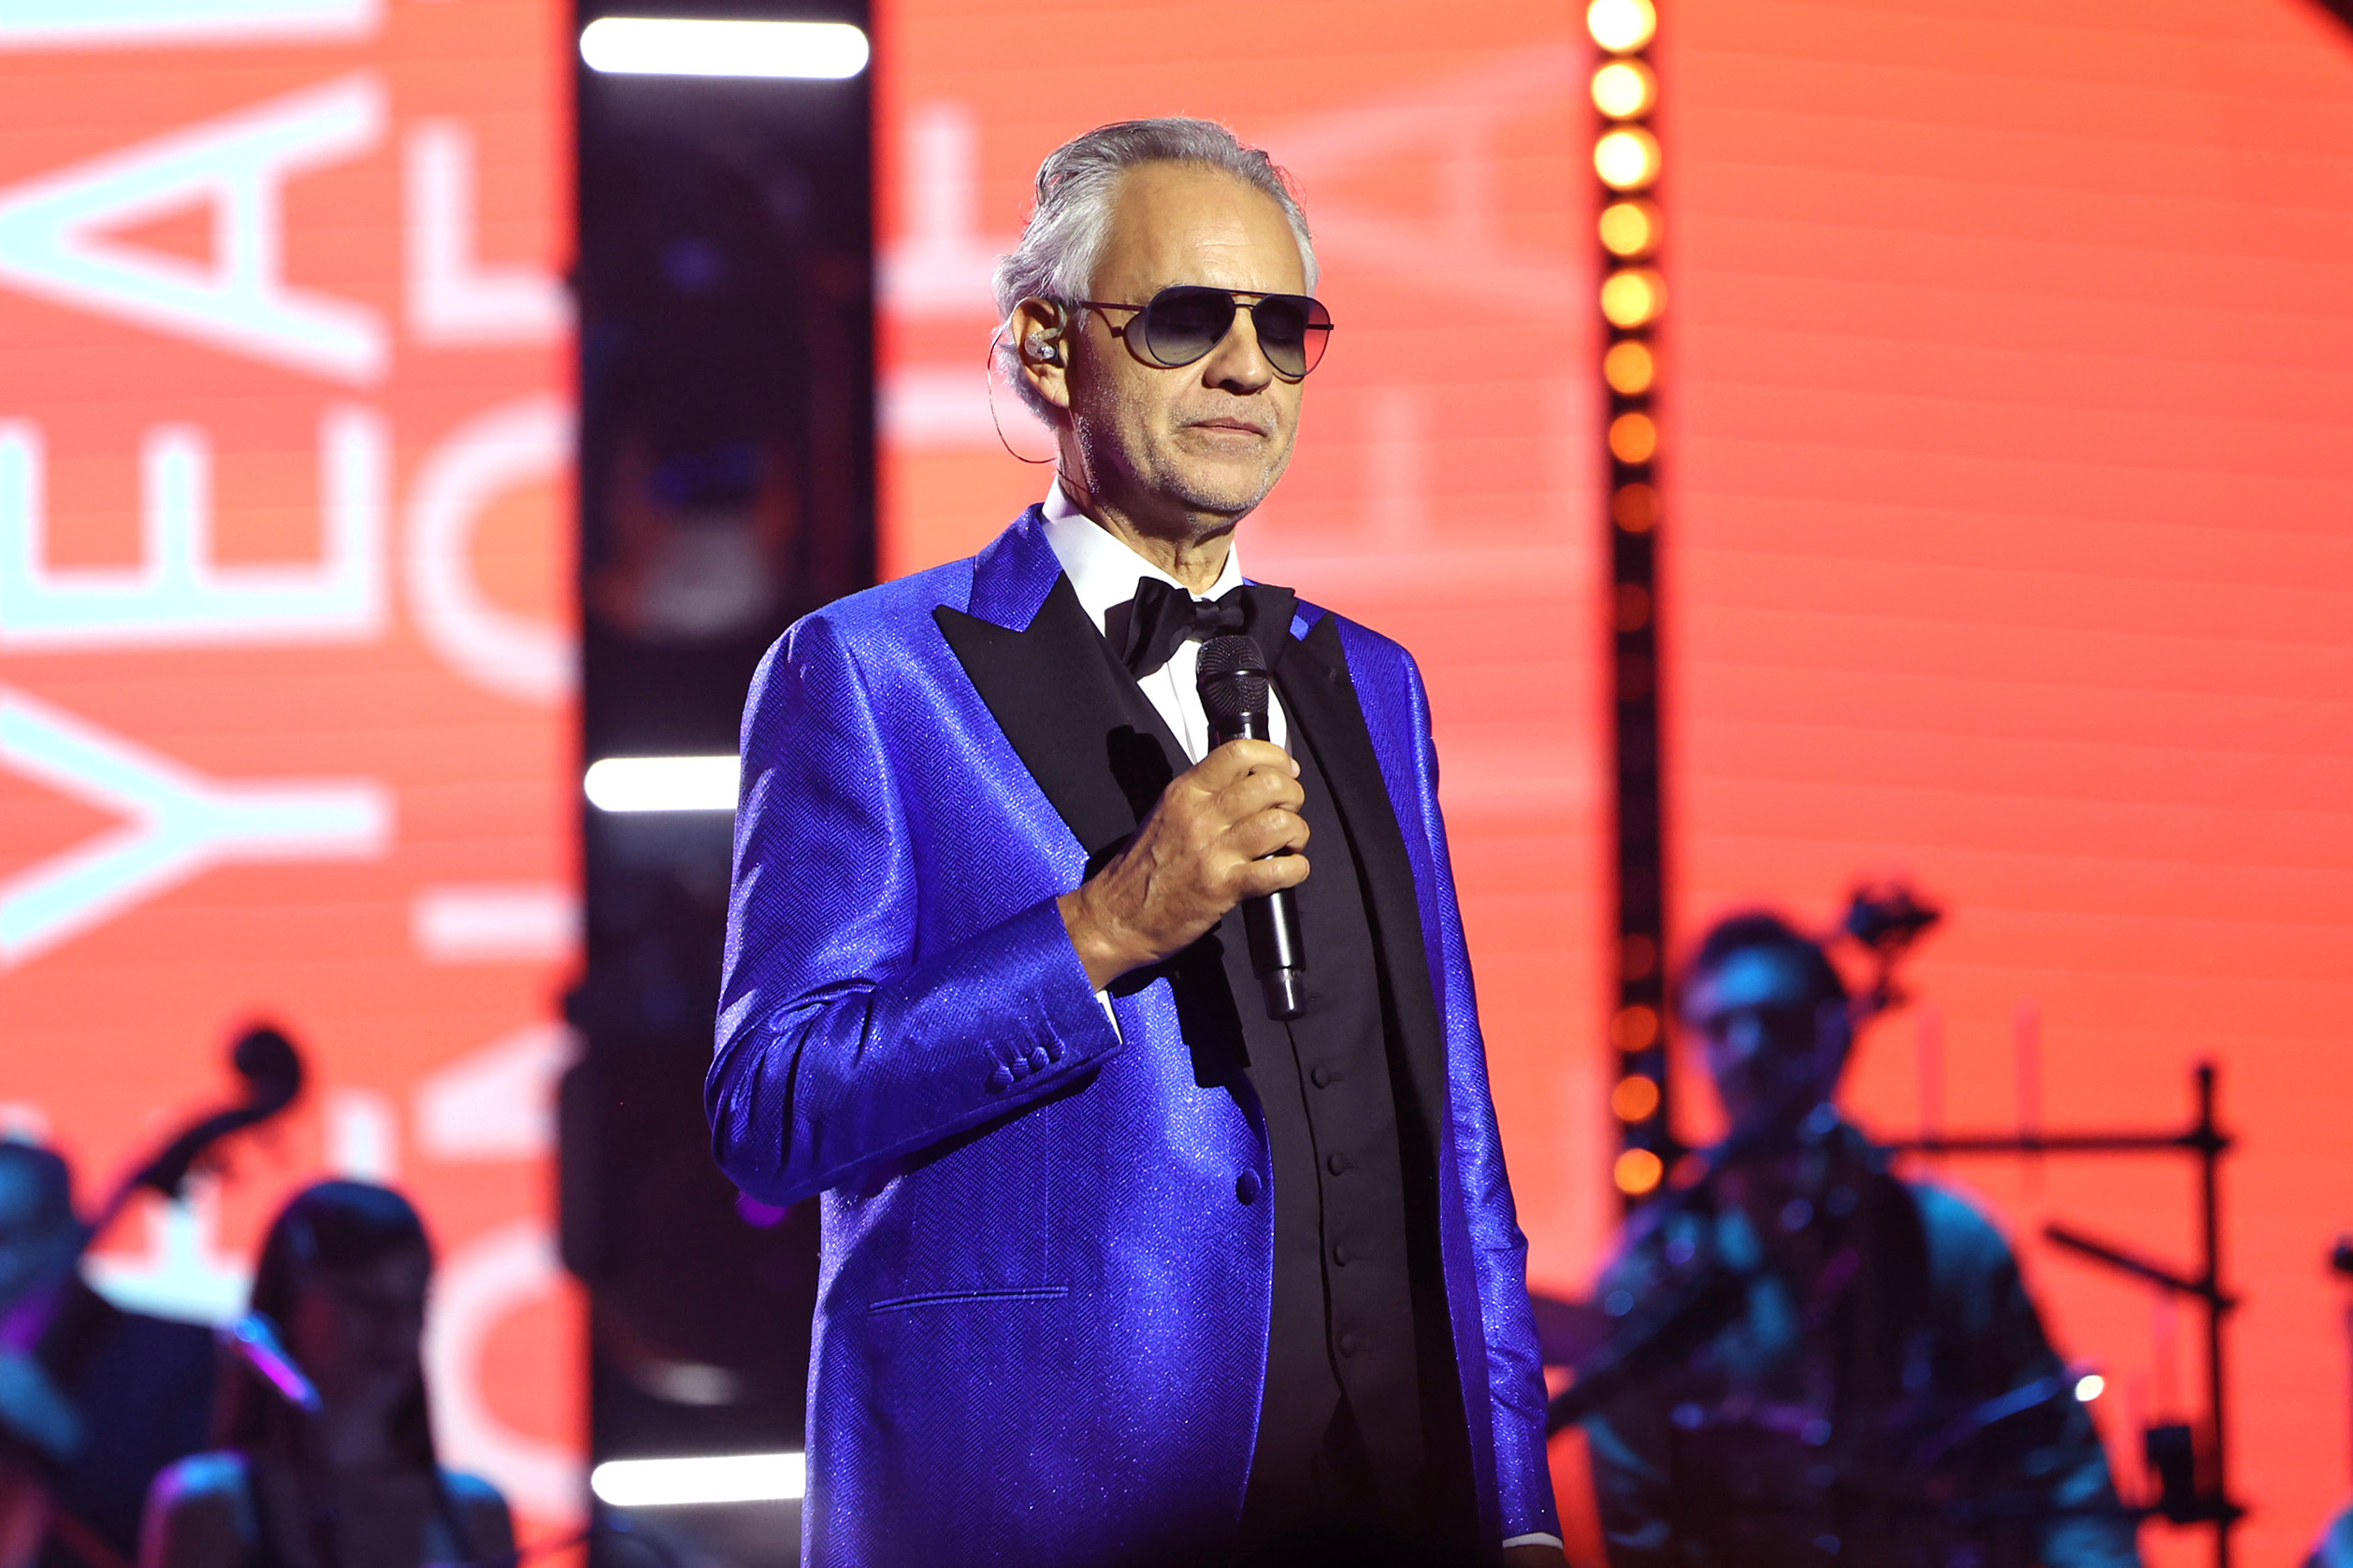 Andrea Bocelli: 'It's beautiful to sing for everybody